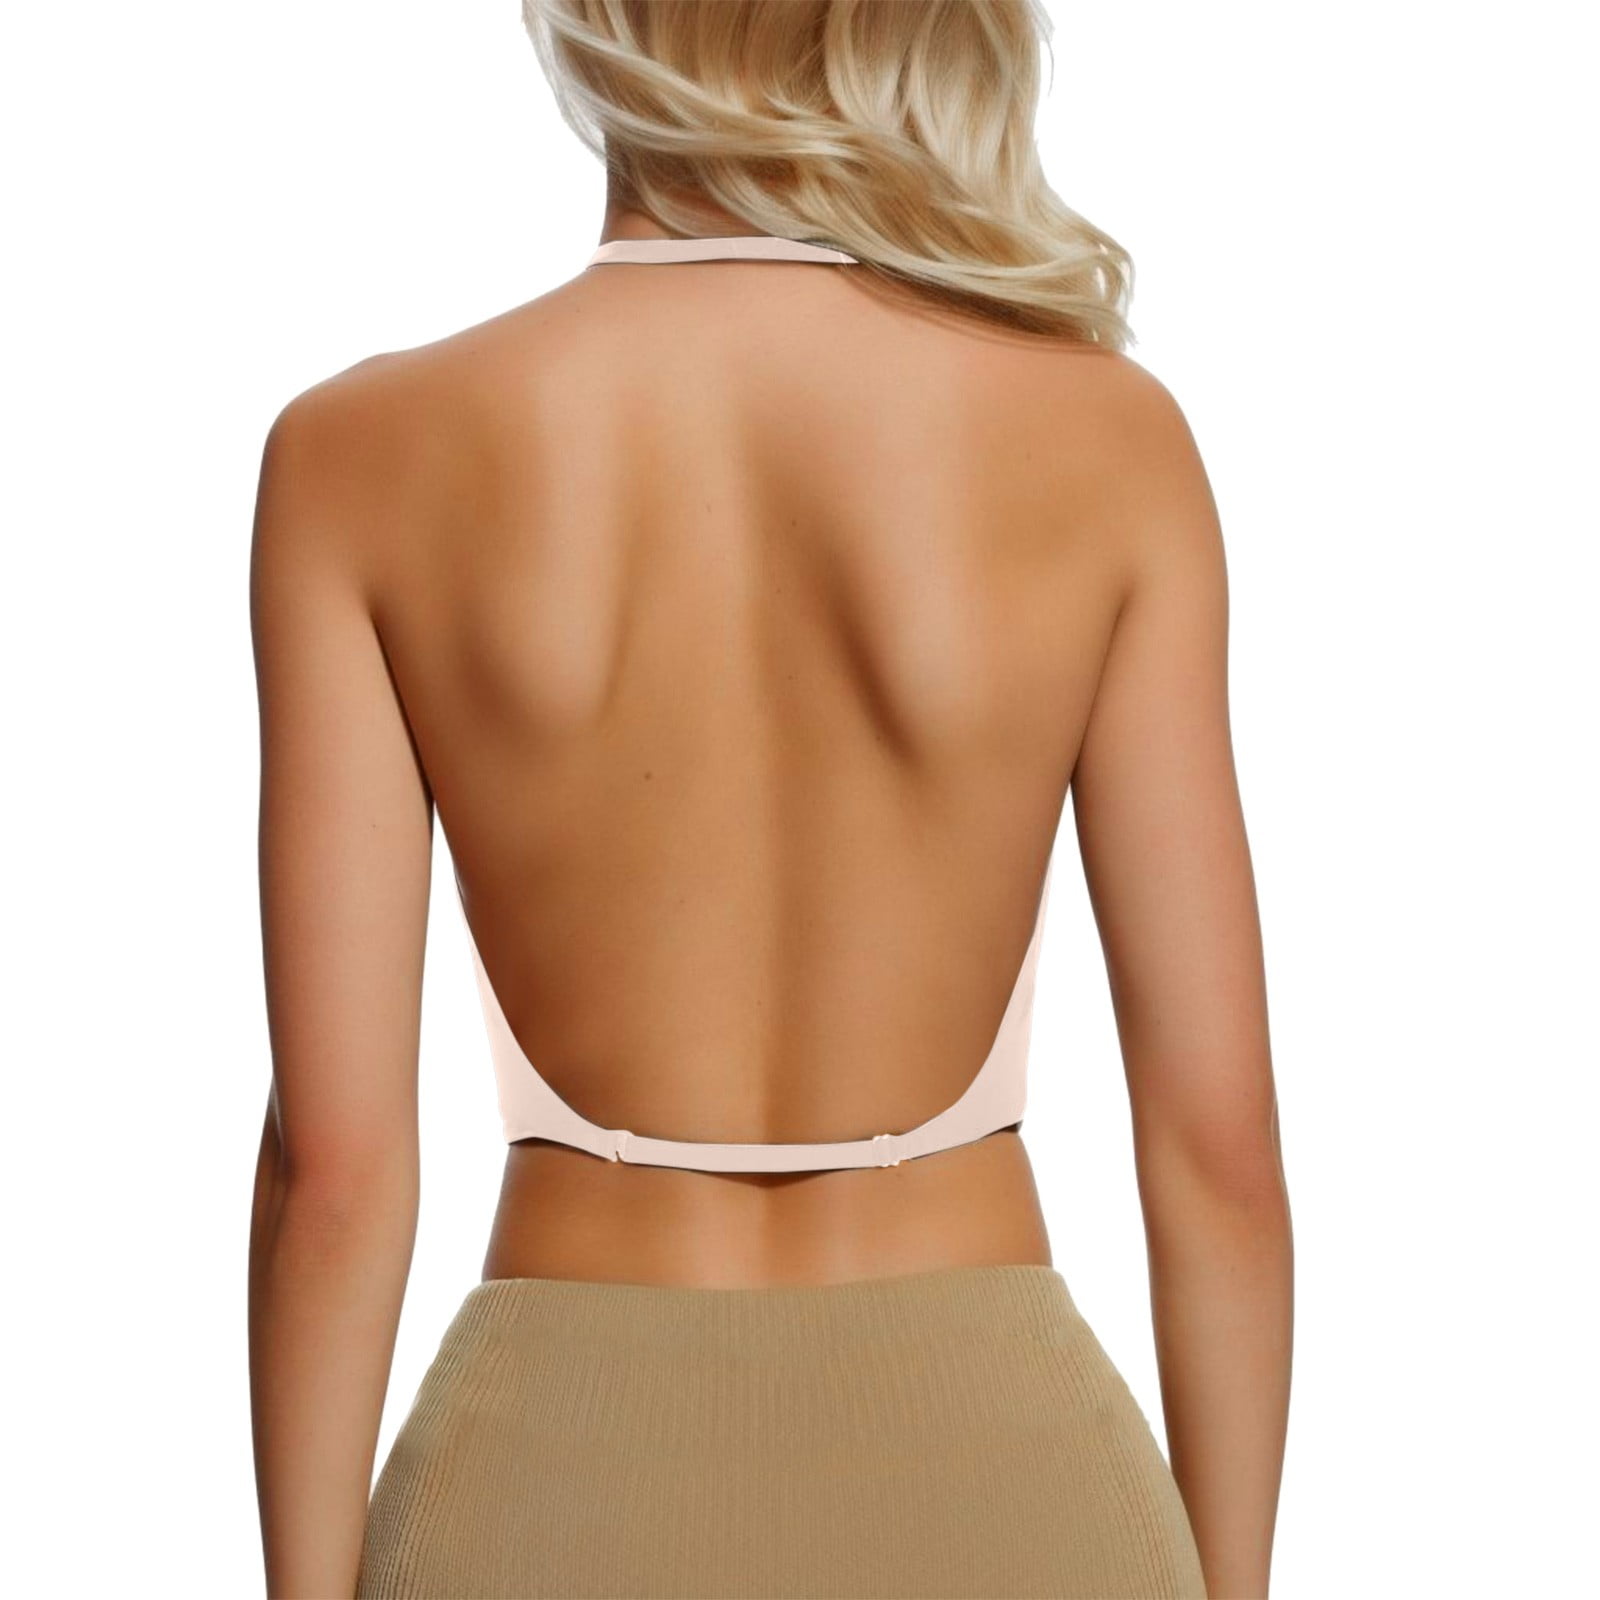 Fashion Forms Shantina Lite Backless Strapless Bra Nude B Cup Size  undefined - $20 New With Tags - From Megan